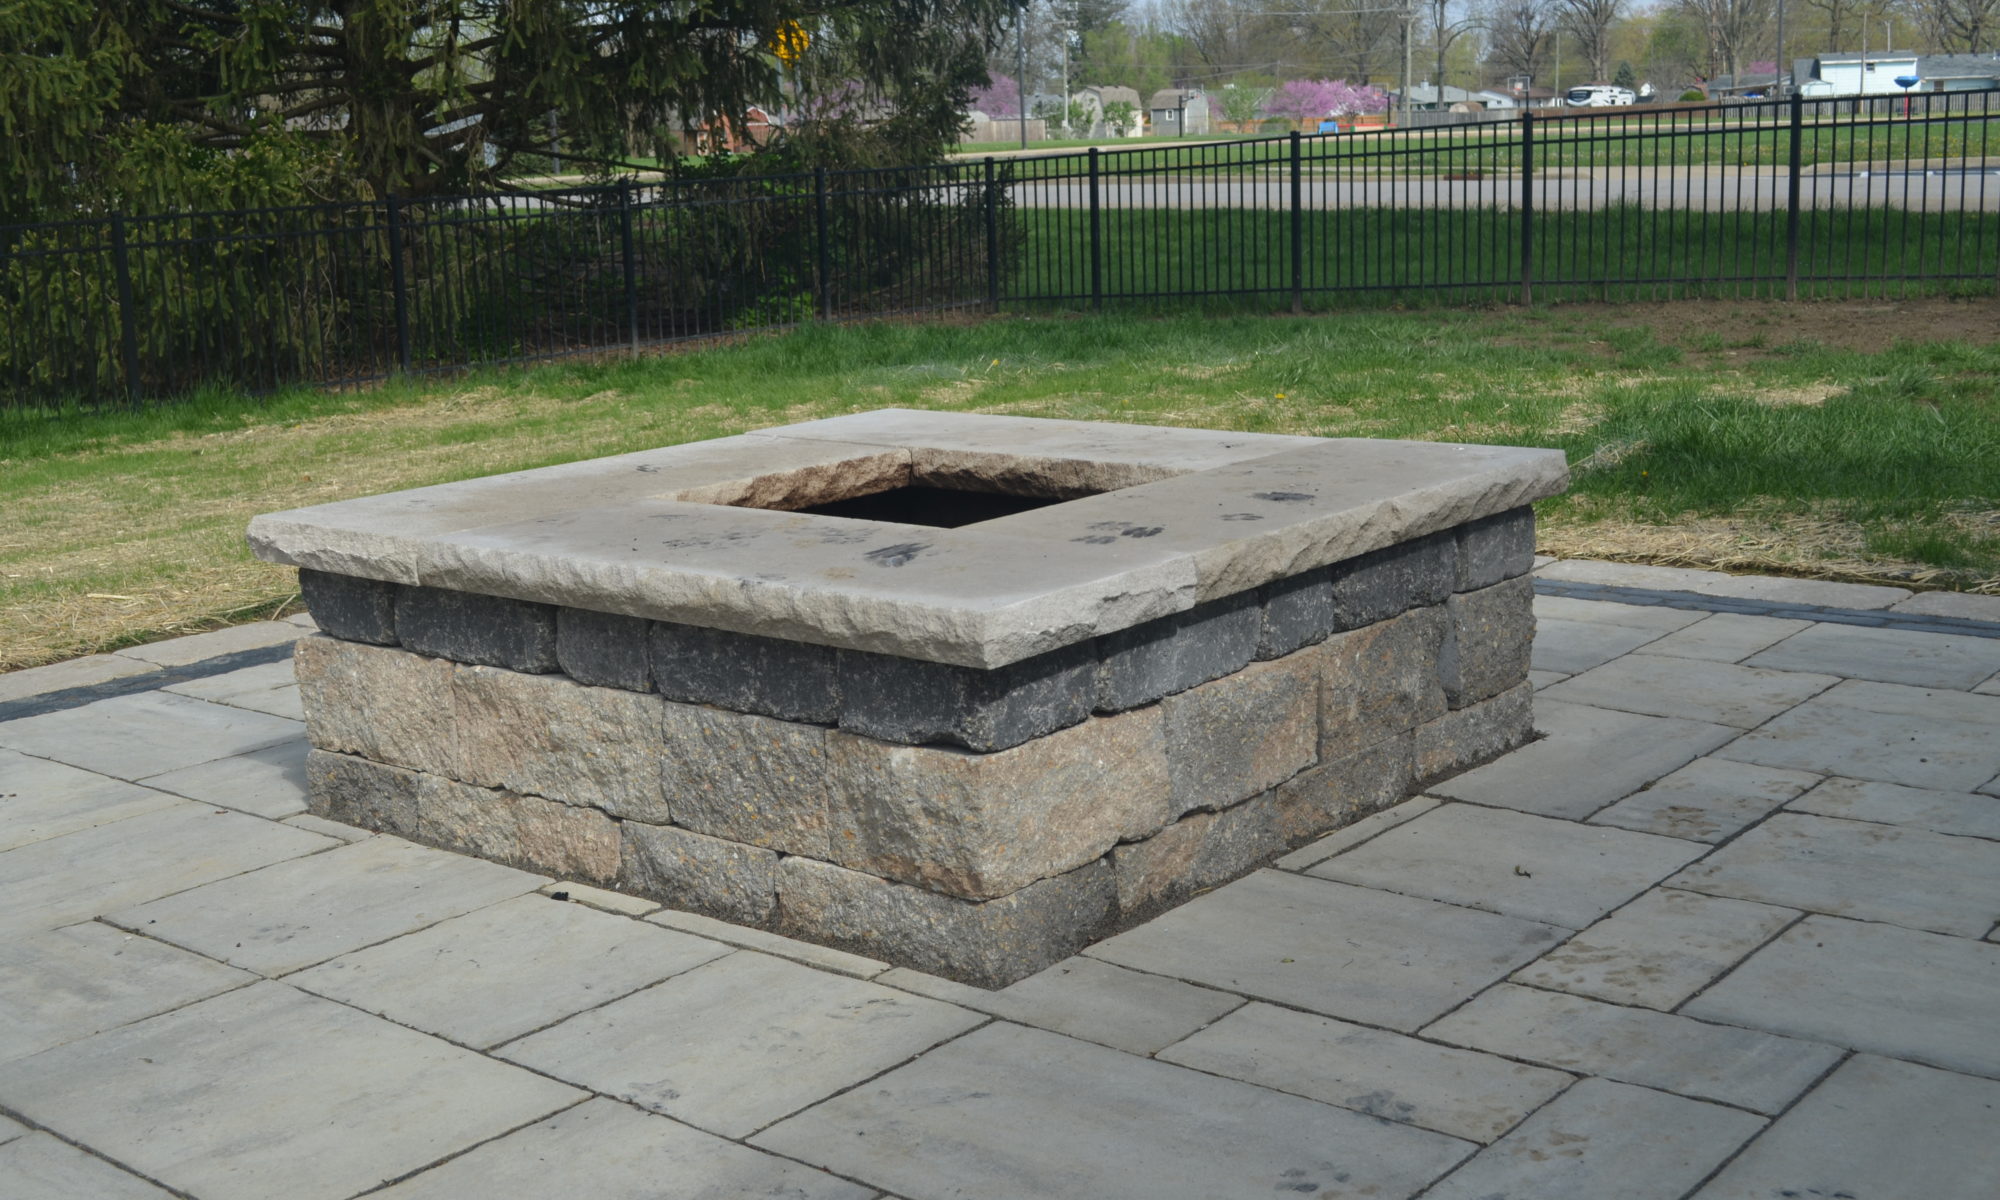 Precision Outdoors Dual Patios Plainfield Indiana Grilling patio dining patio firepit fire pit paver walkway landscaping outdoor space beautiful backyard summer grilling outside pavers patios secluded separate patios